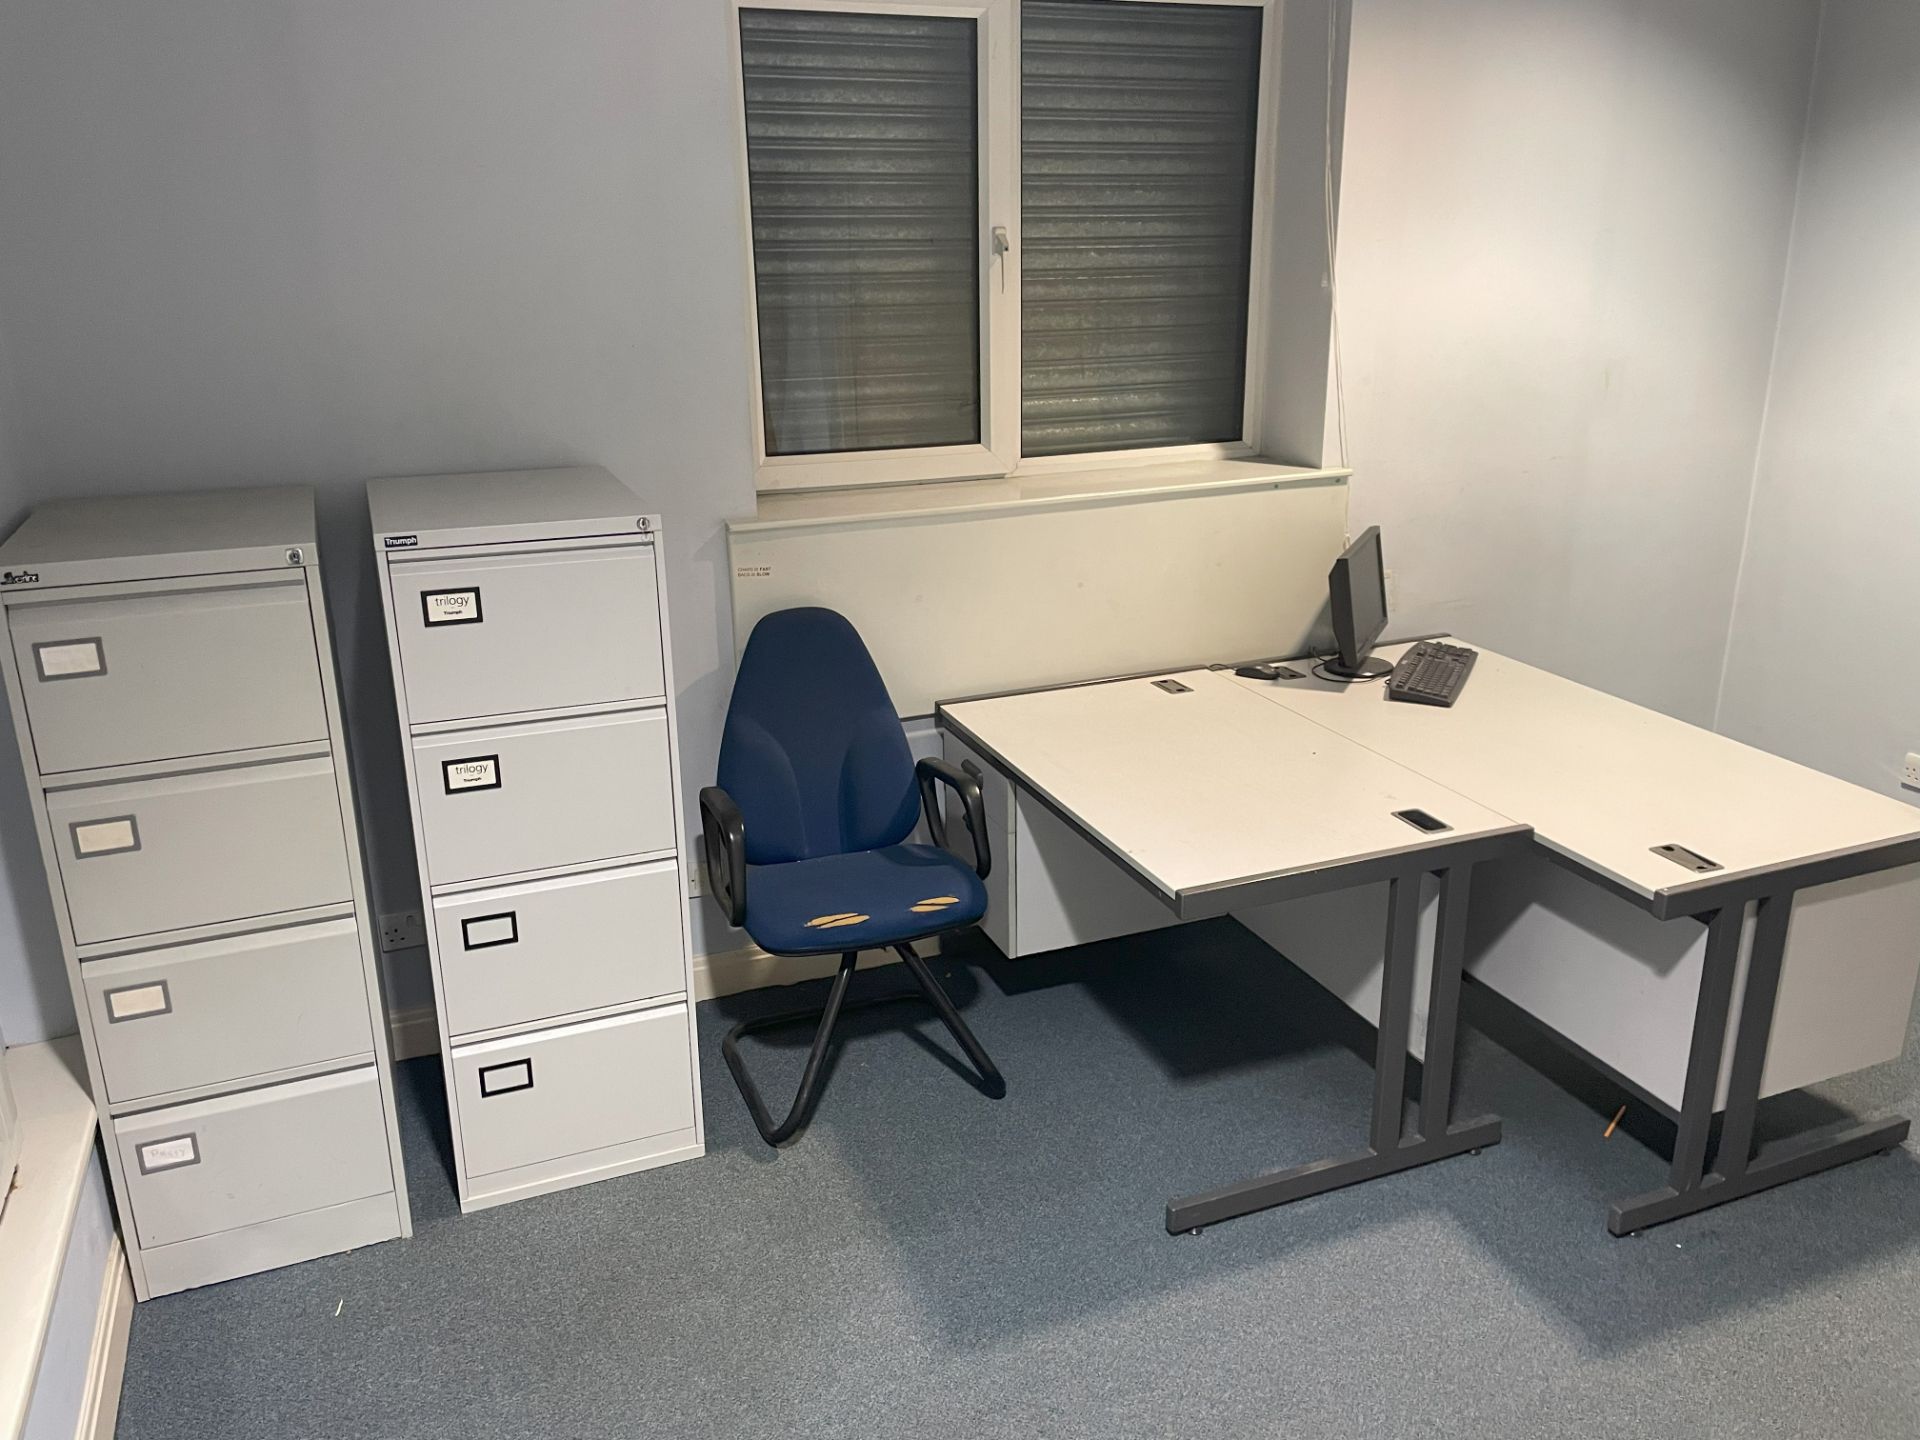 G Floor 01 Office Furniture - 2 x 4 Drawer Filing Cabinets and 2 x Desks and Chair (without contents